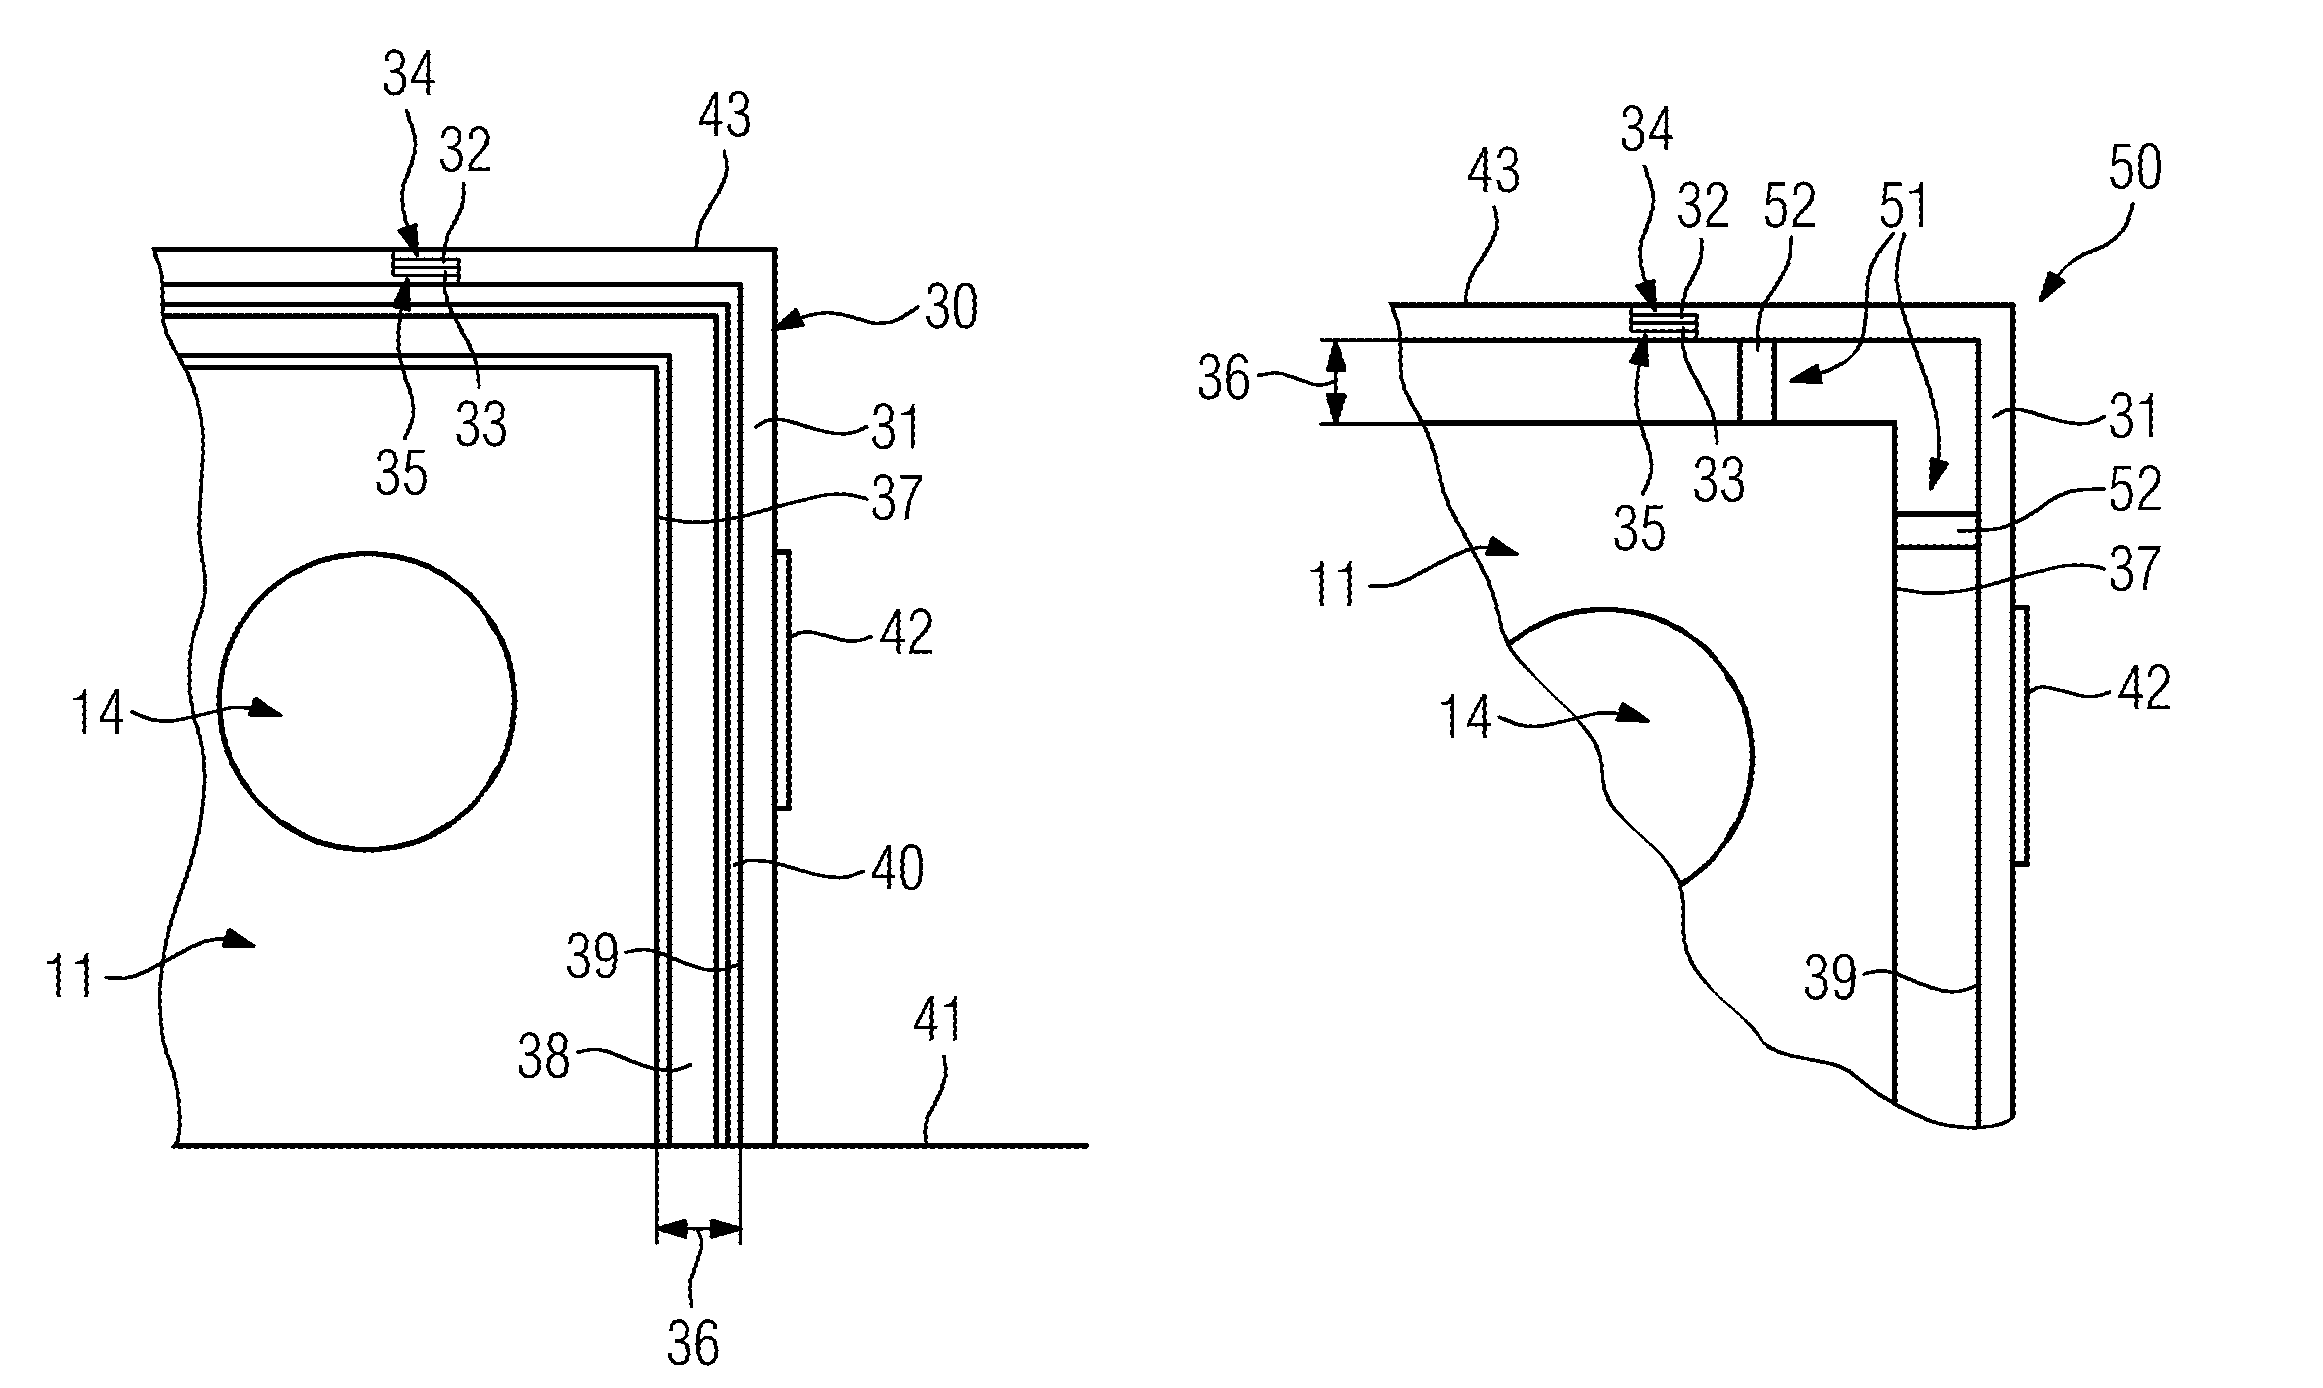 Magnetic resonance apparatus with touchscreen in flexible foil housing